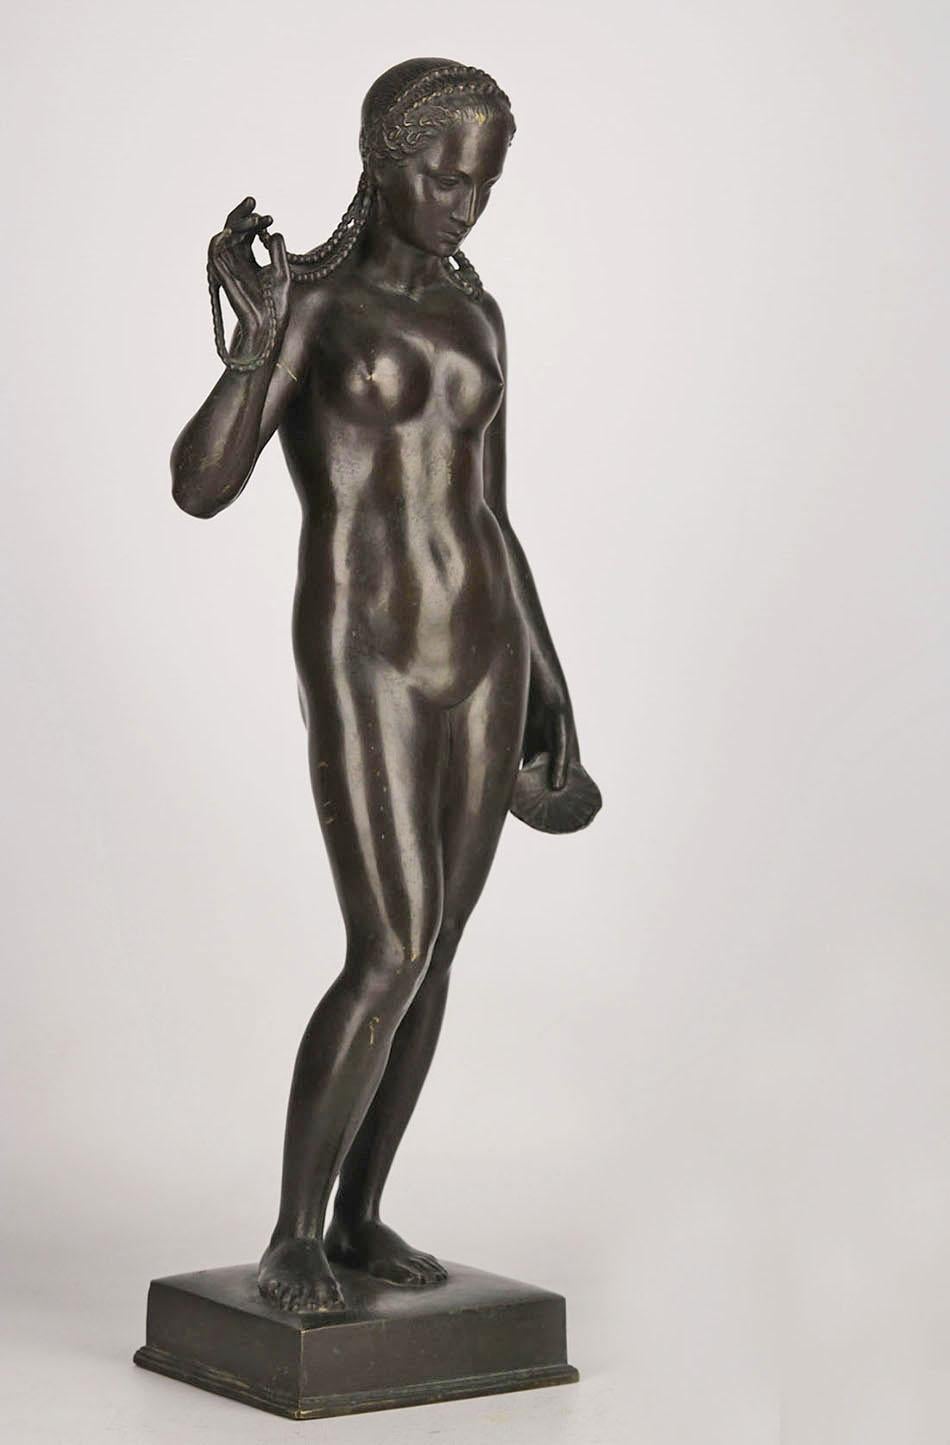 Early 20th century Jugendstil german patinated bronze Sculpture 'Nude woman with Braids and Seashell' by Lauchhammer Bildguss Foundry

By: Lauchhammer Bildguss Foundry
Material: bronze, metal
Technique: cast, patinated, metalwork
Dimensions: 4 in x